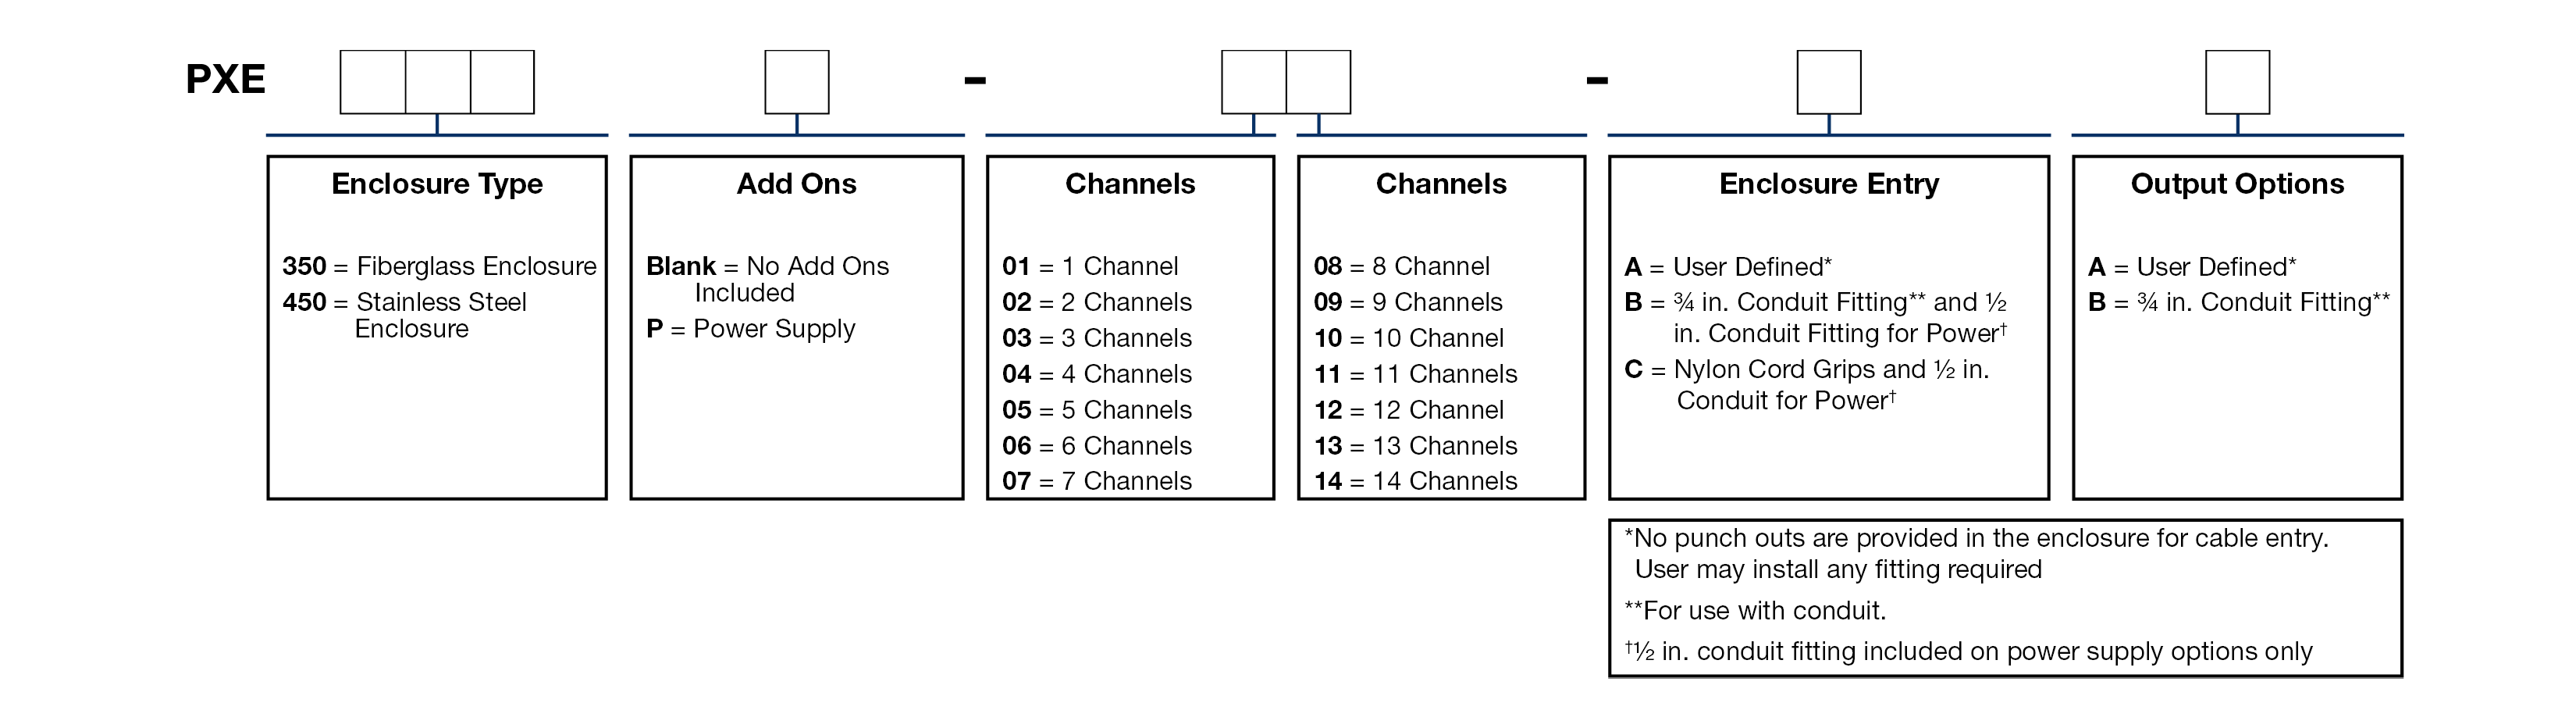 A chart showing configuration options to create a complete part number for ordering a CTC PXE450 Extended Capacity enclosure.